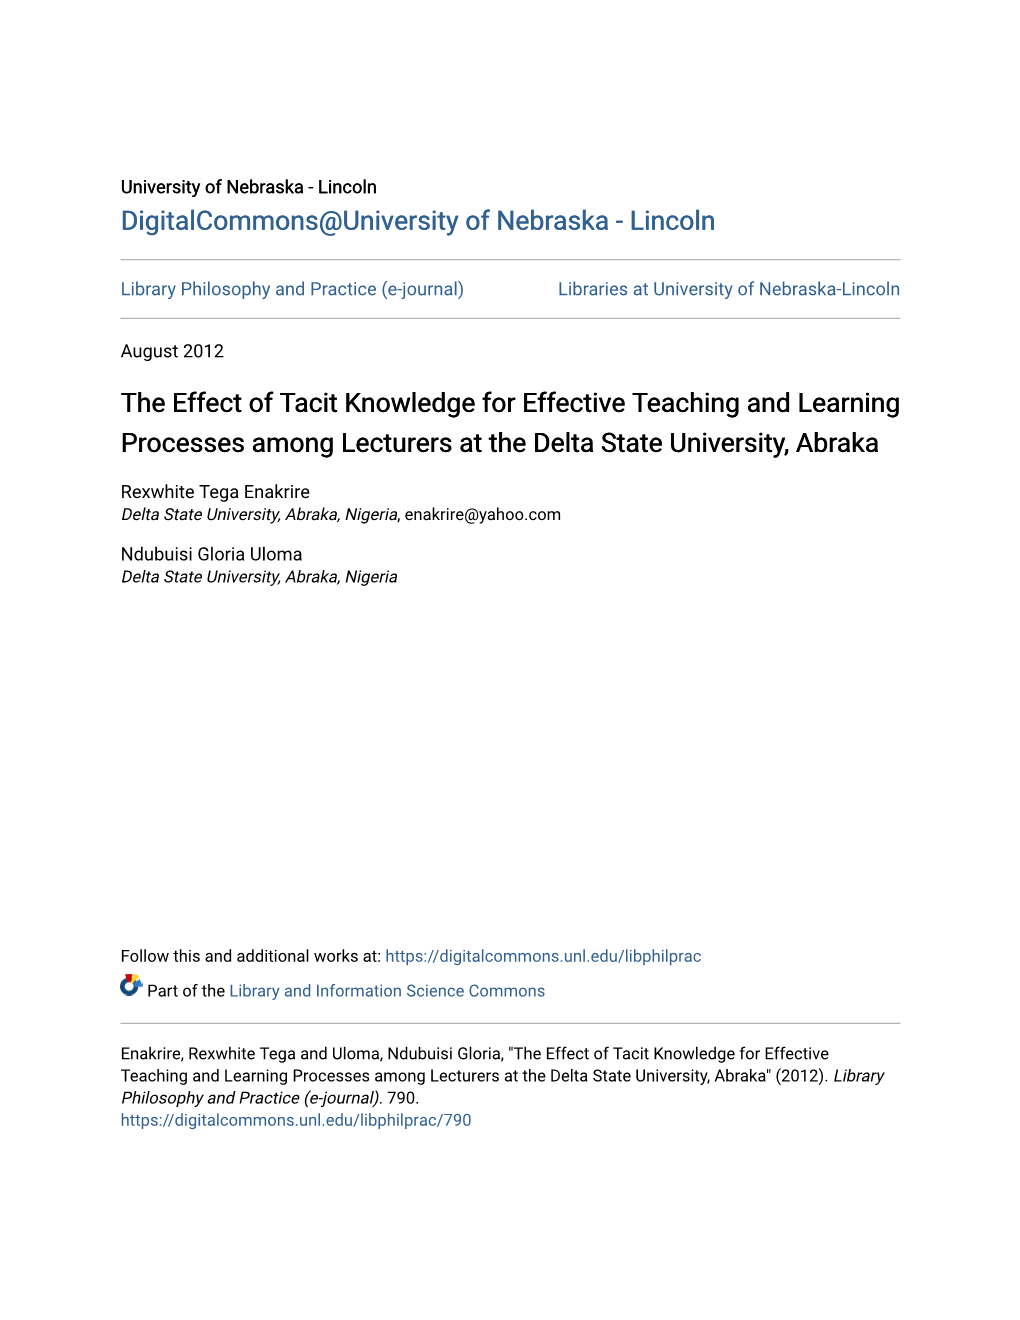 The Effect of Tacit Knowledge for Effective Teaching and Learning Processes Among Lecturers at the Delta State University, Abraka